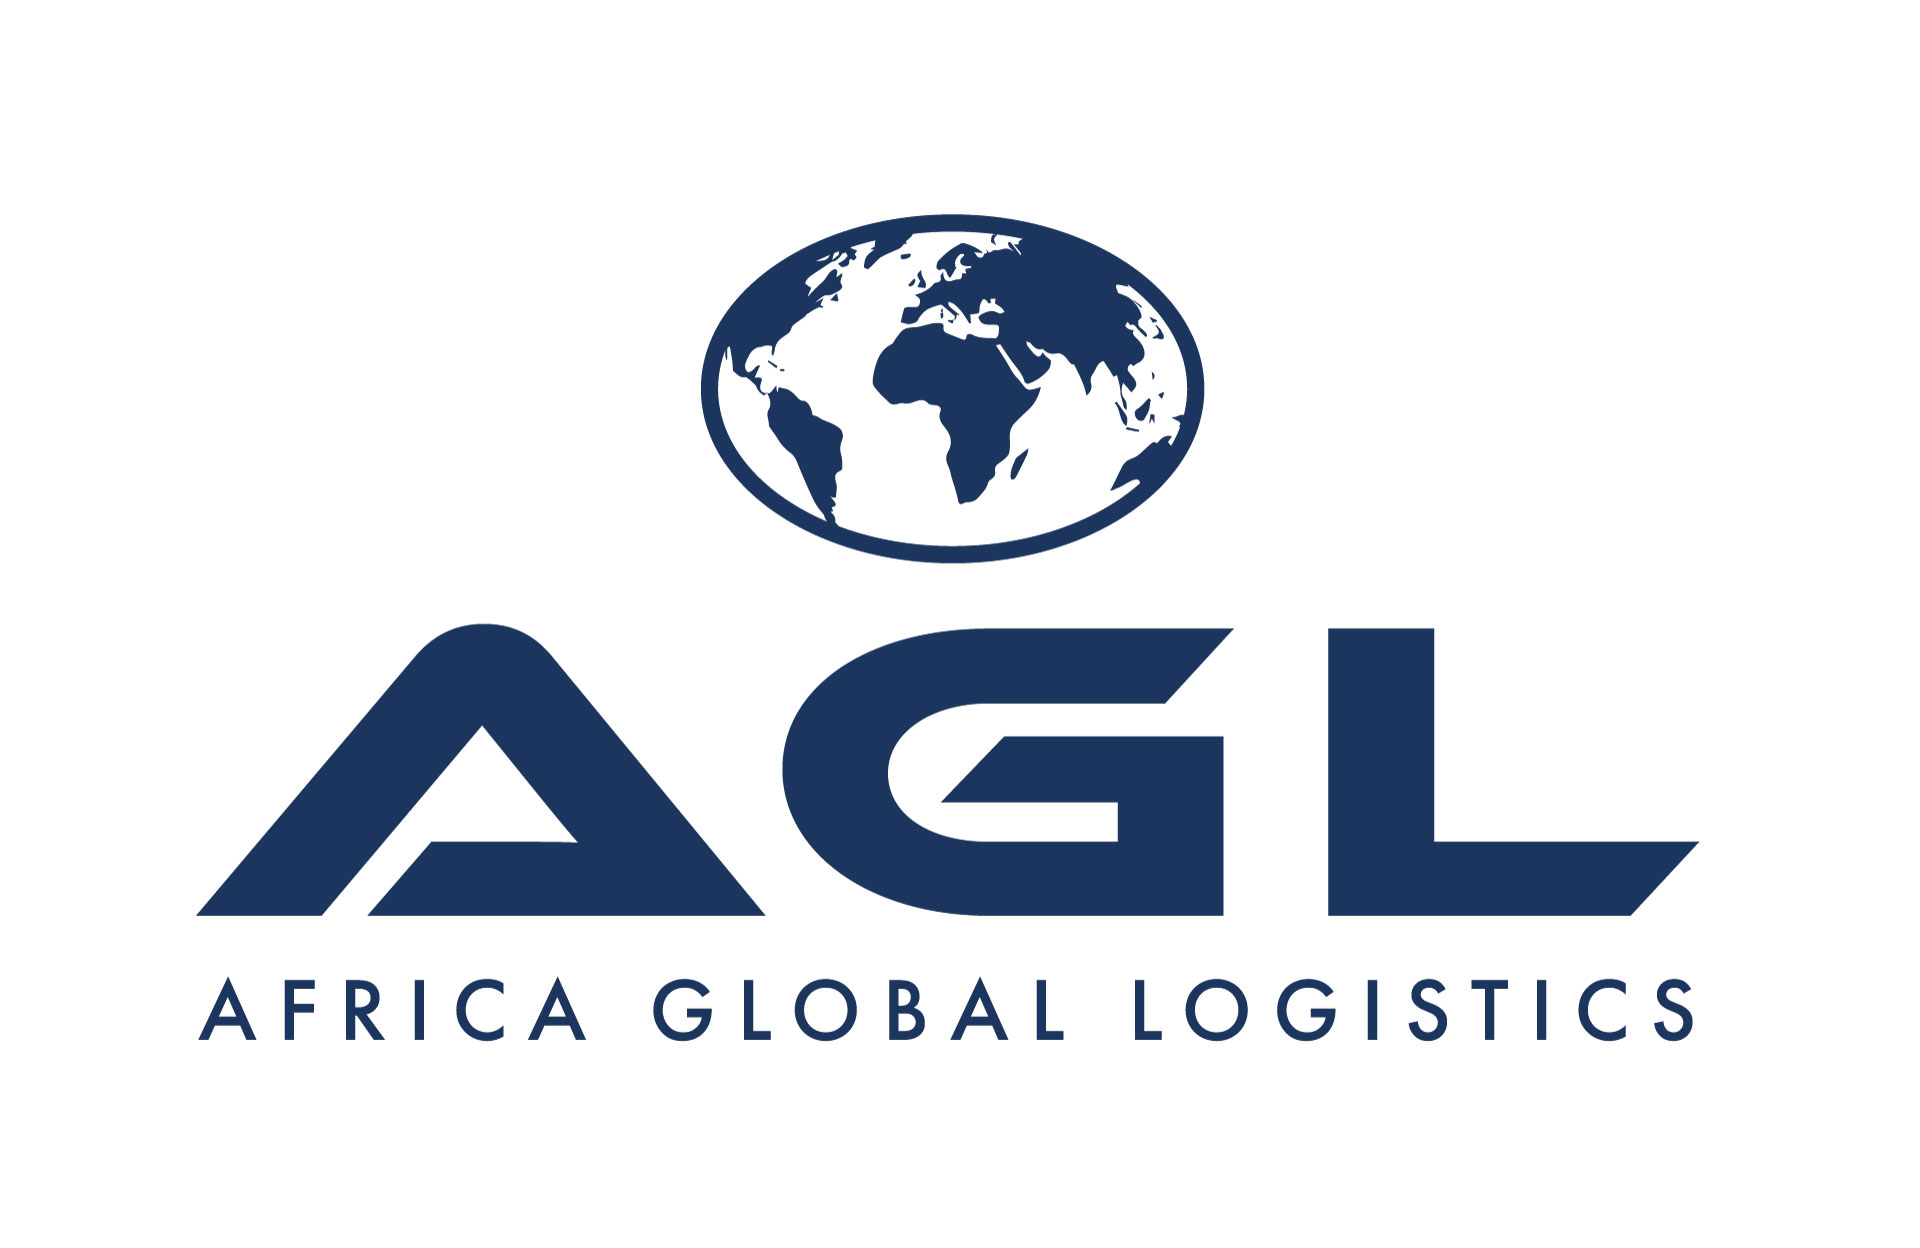 AGL (AFRICA GLOBAL LOGISTICS,) at the heart of Africa’s transformation